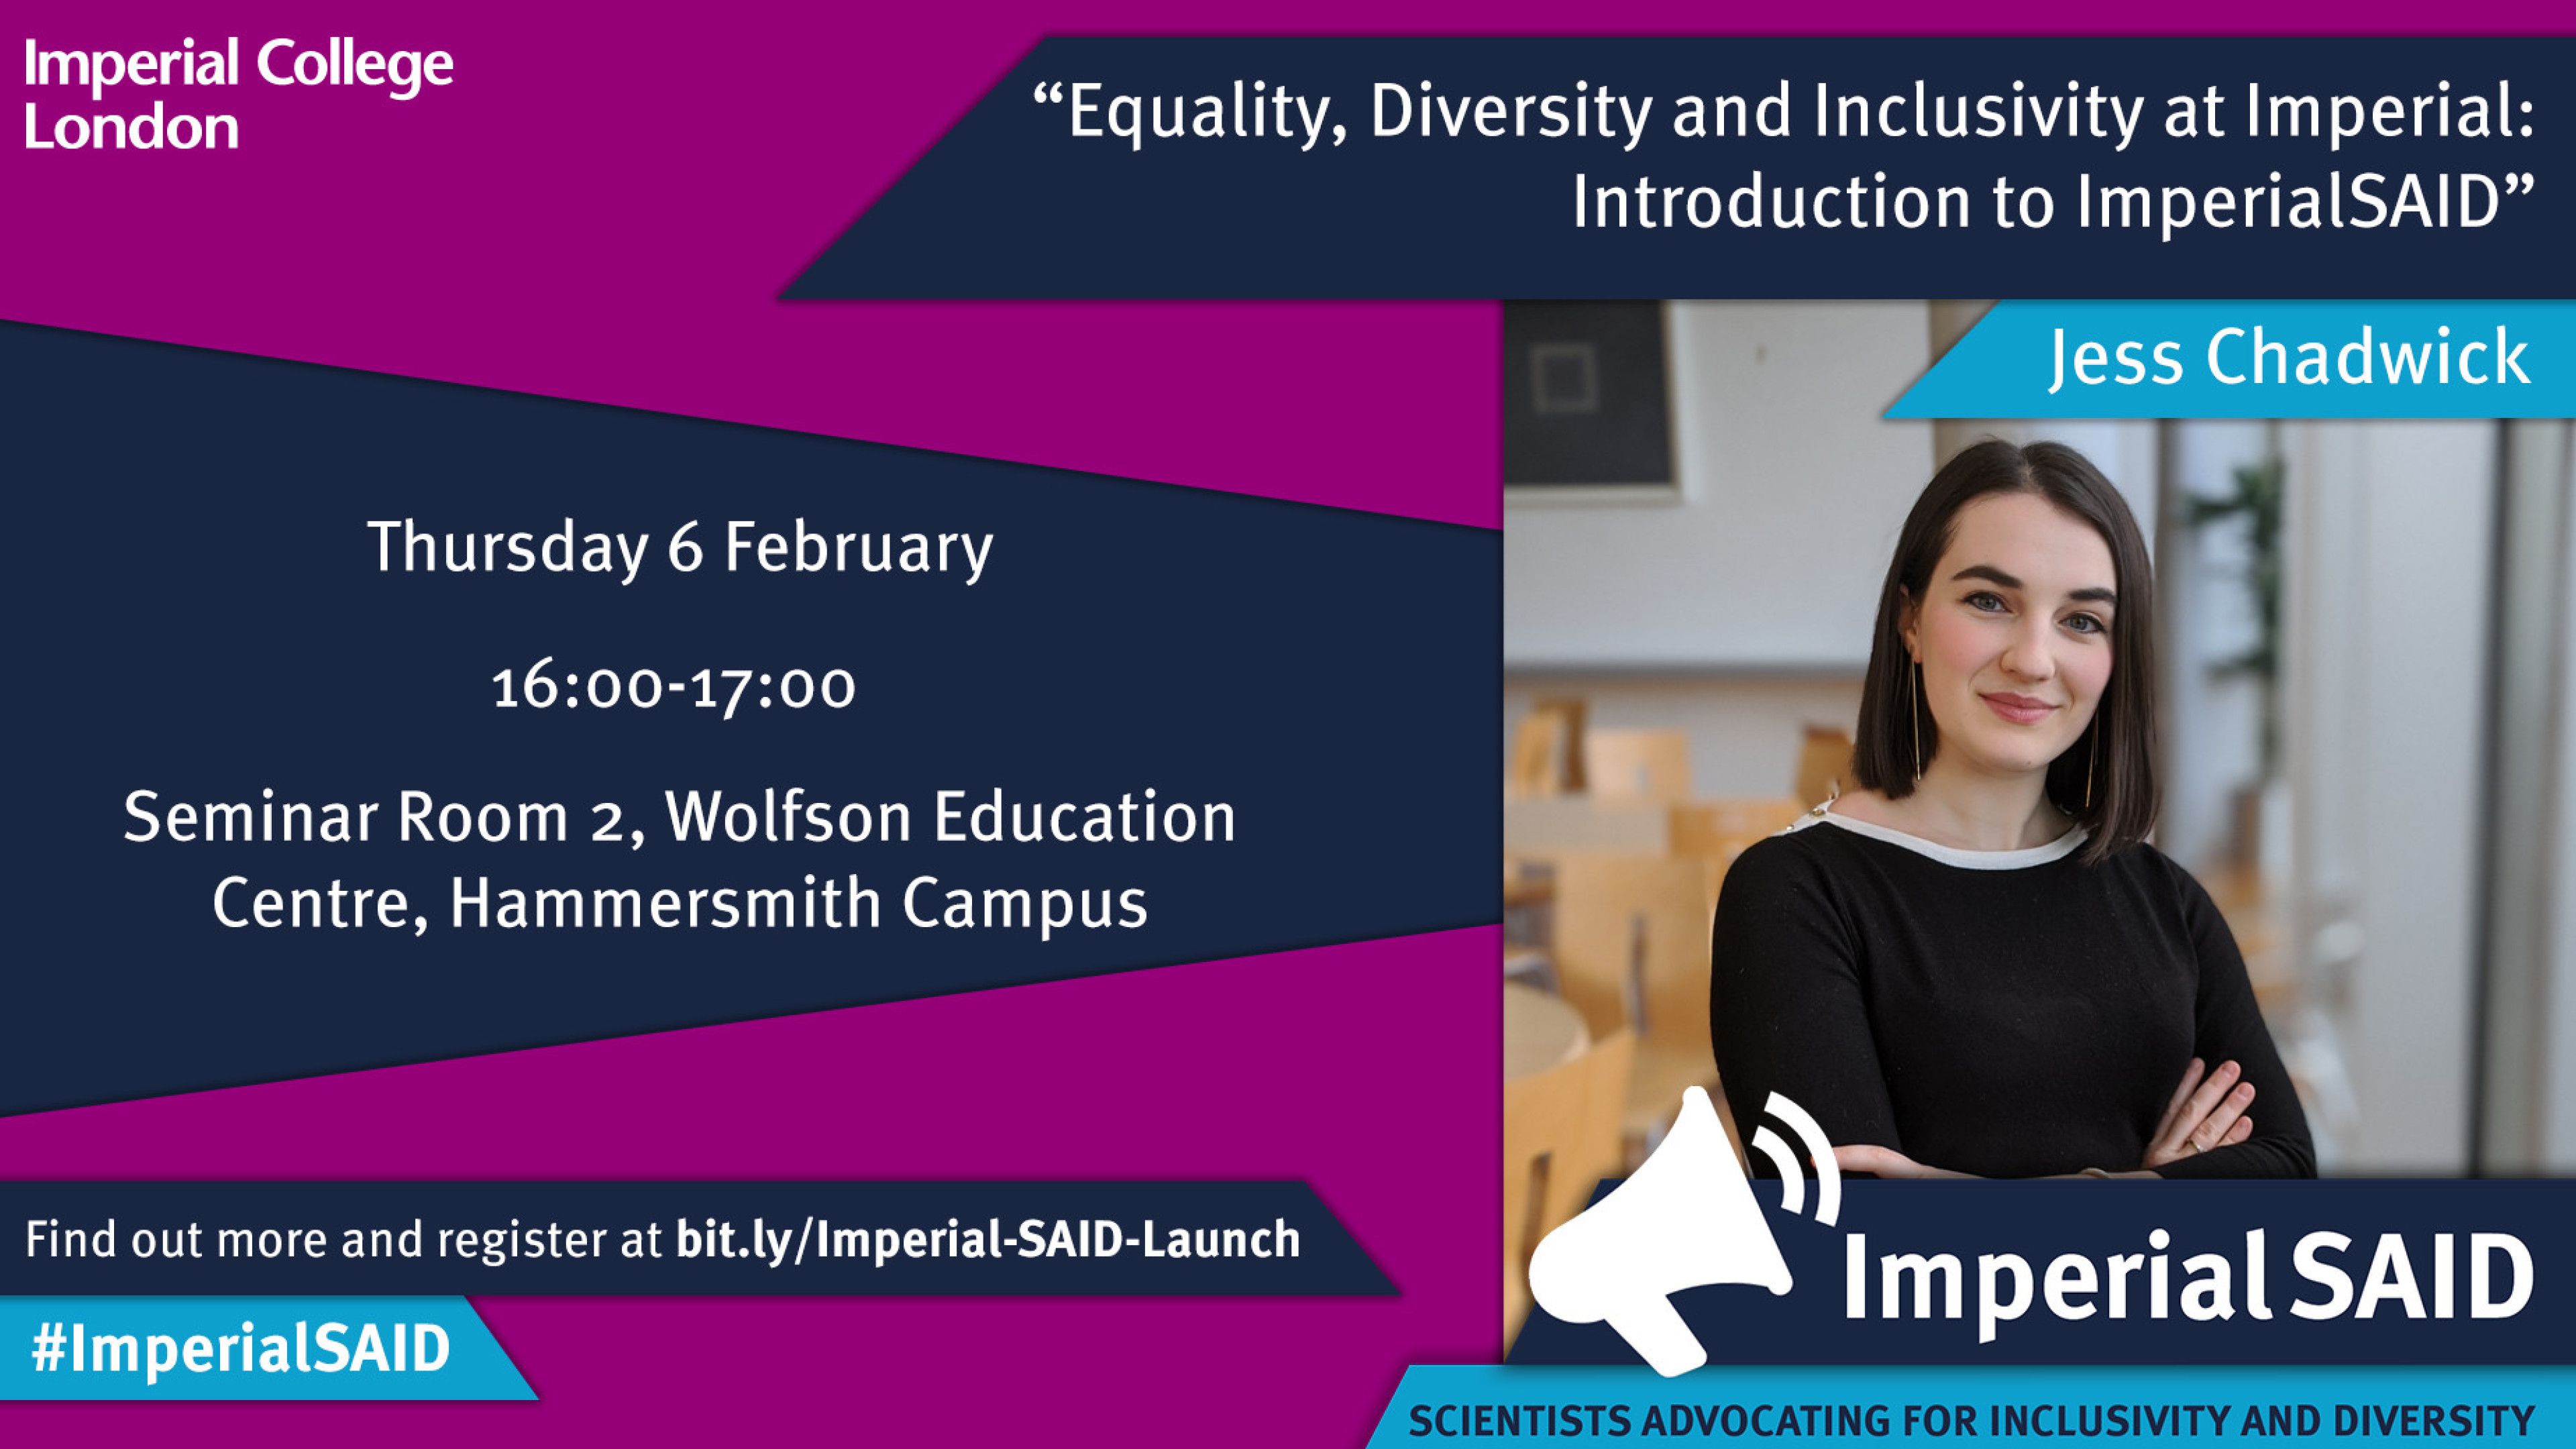 Equality, Diversity and Inclusivity at Imperial